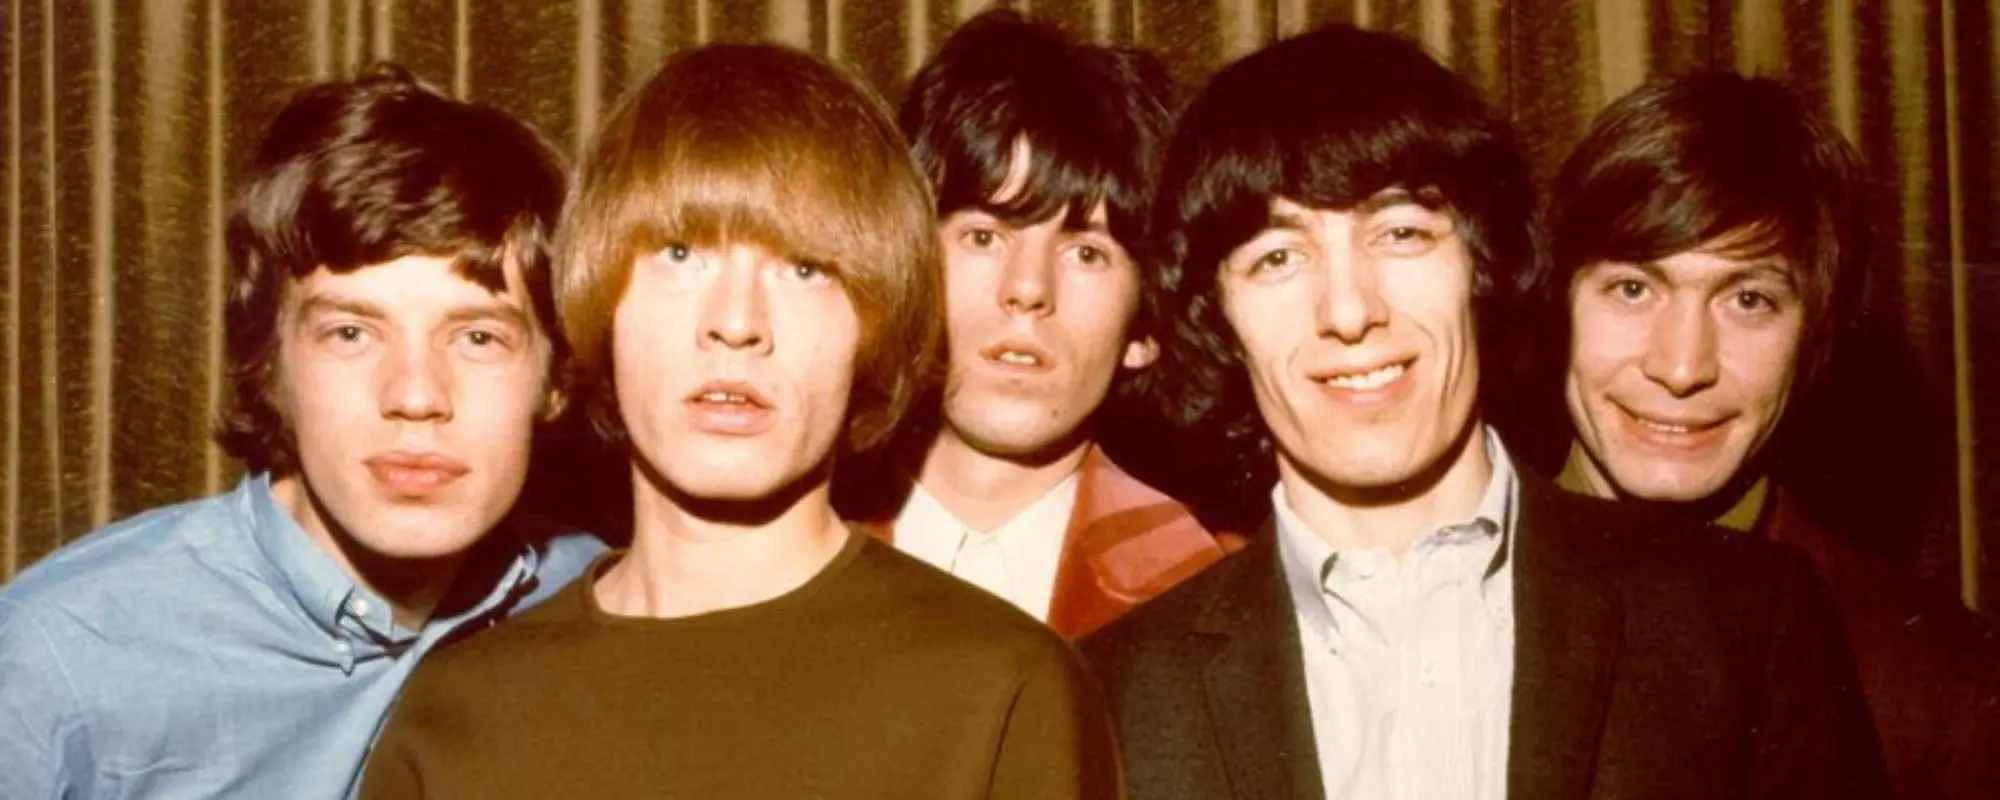 Rolling Stones Documentary ‘The Stones & Brian Jones’ Comes to Theaters and Streaming in November